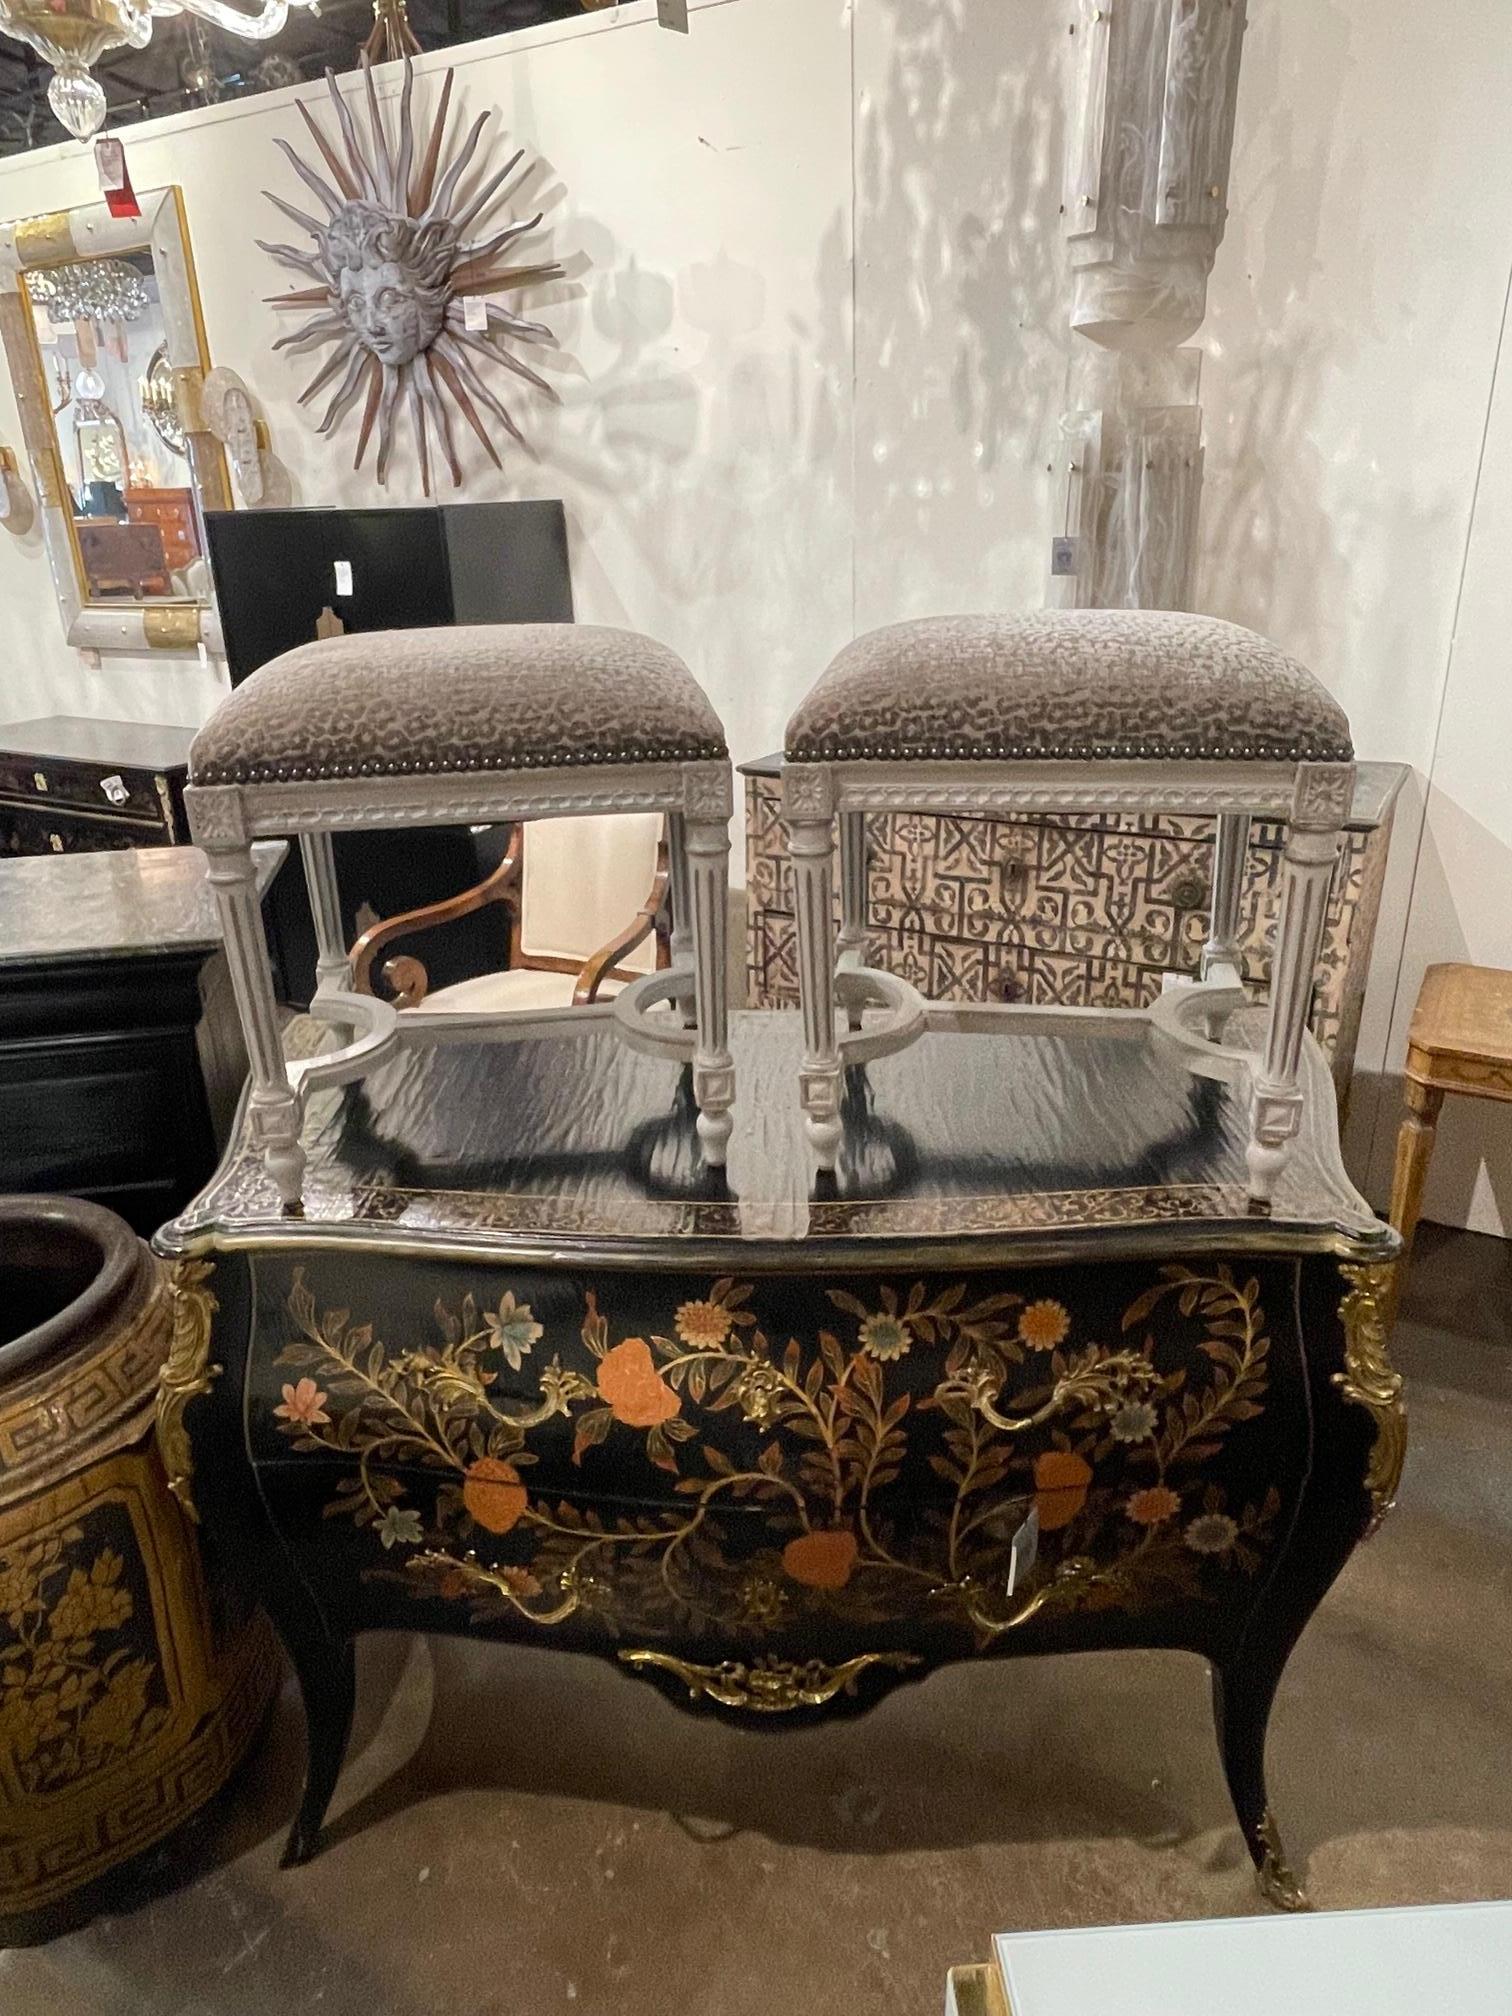 Lovely Louis XVI upholstered benched with tan and creme animal print fabric. The benches also have very nice carvings and are painted with a white-wash finish. Beautiful! Note: price listed is per item.